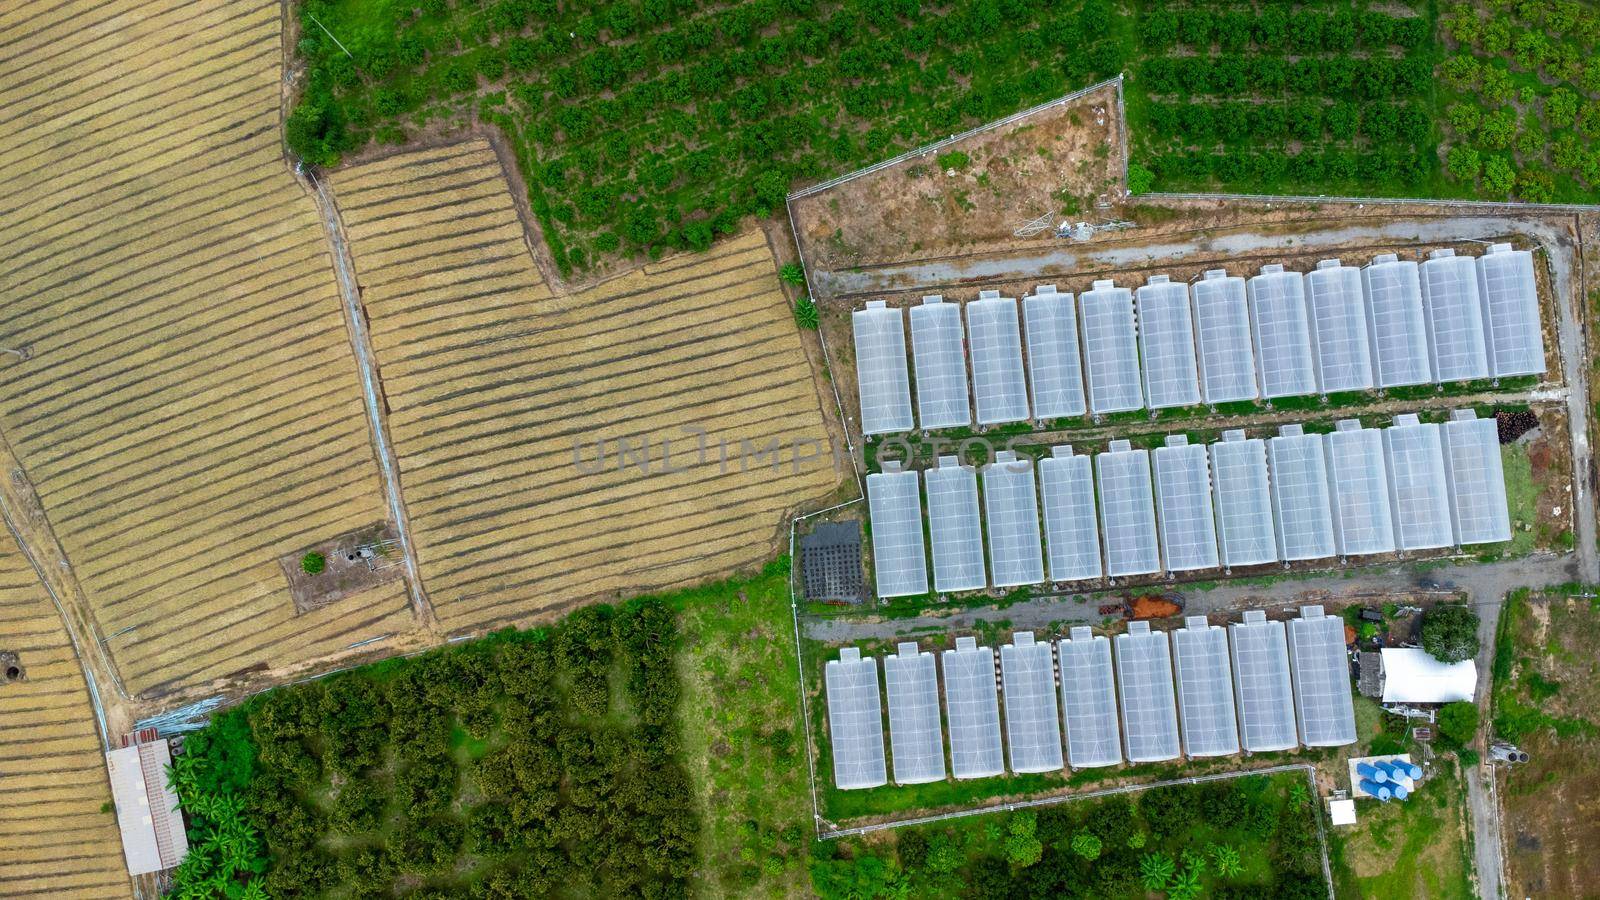 Aerial view of an environmentally friendly building or factory consisting of solar panels or photovoltaic panels on the roof. Technology to generate electrical power. Sustainable energy for the future by TEERASAK